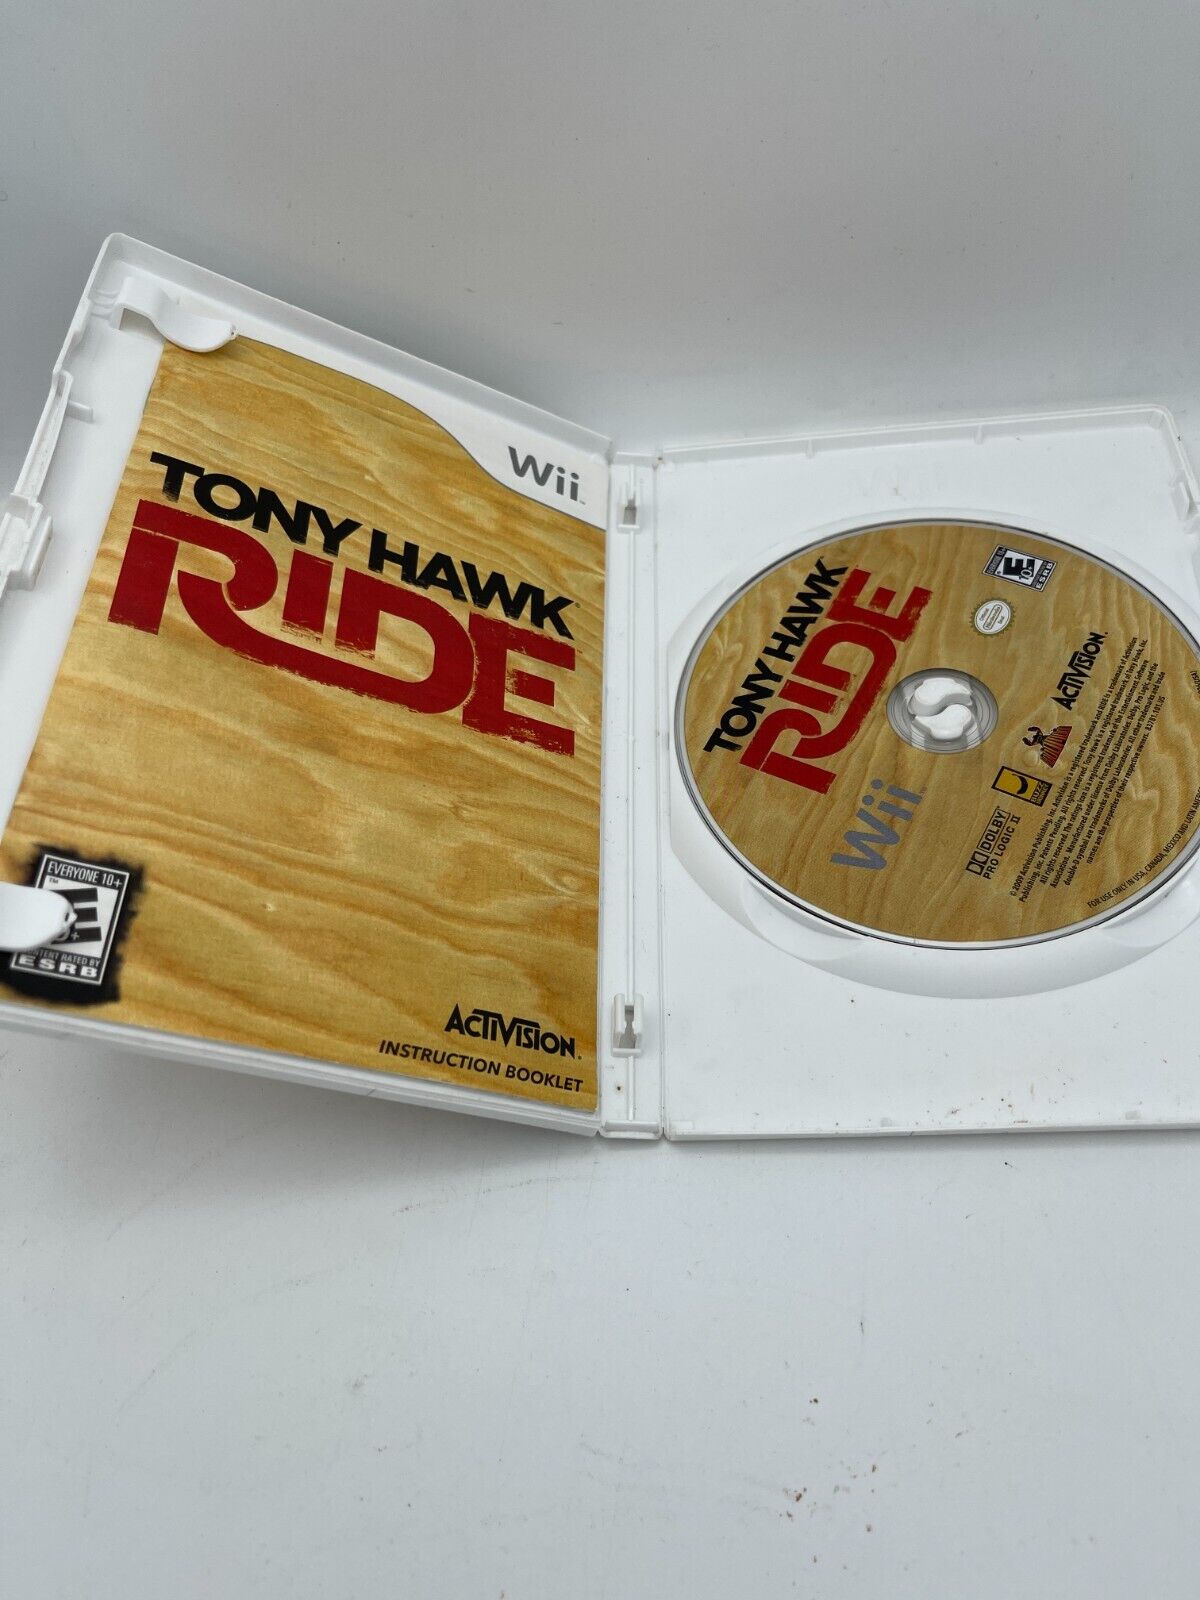 Tony Hawk Ride Video Game - COMPLETE with Case & Manual (Nintendo Wii)